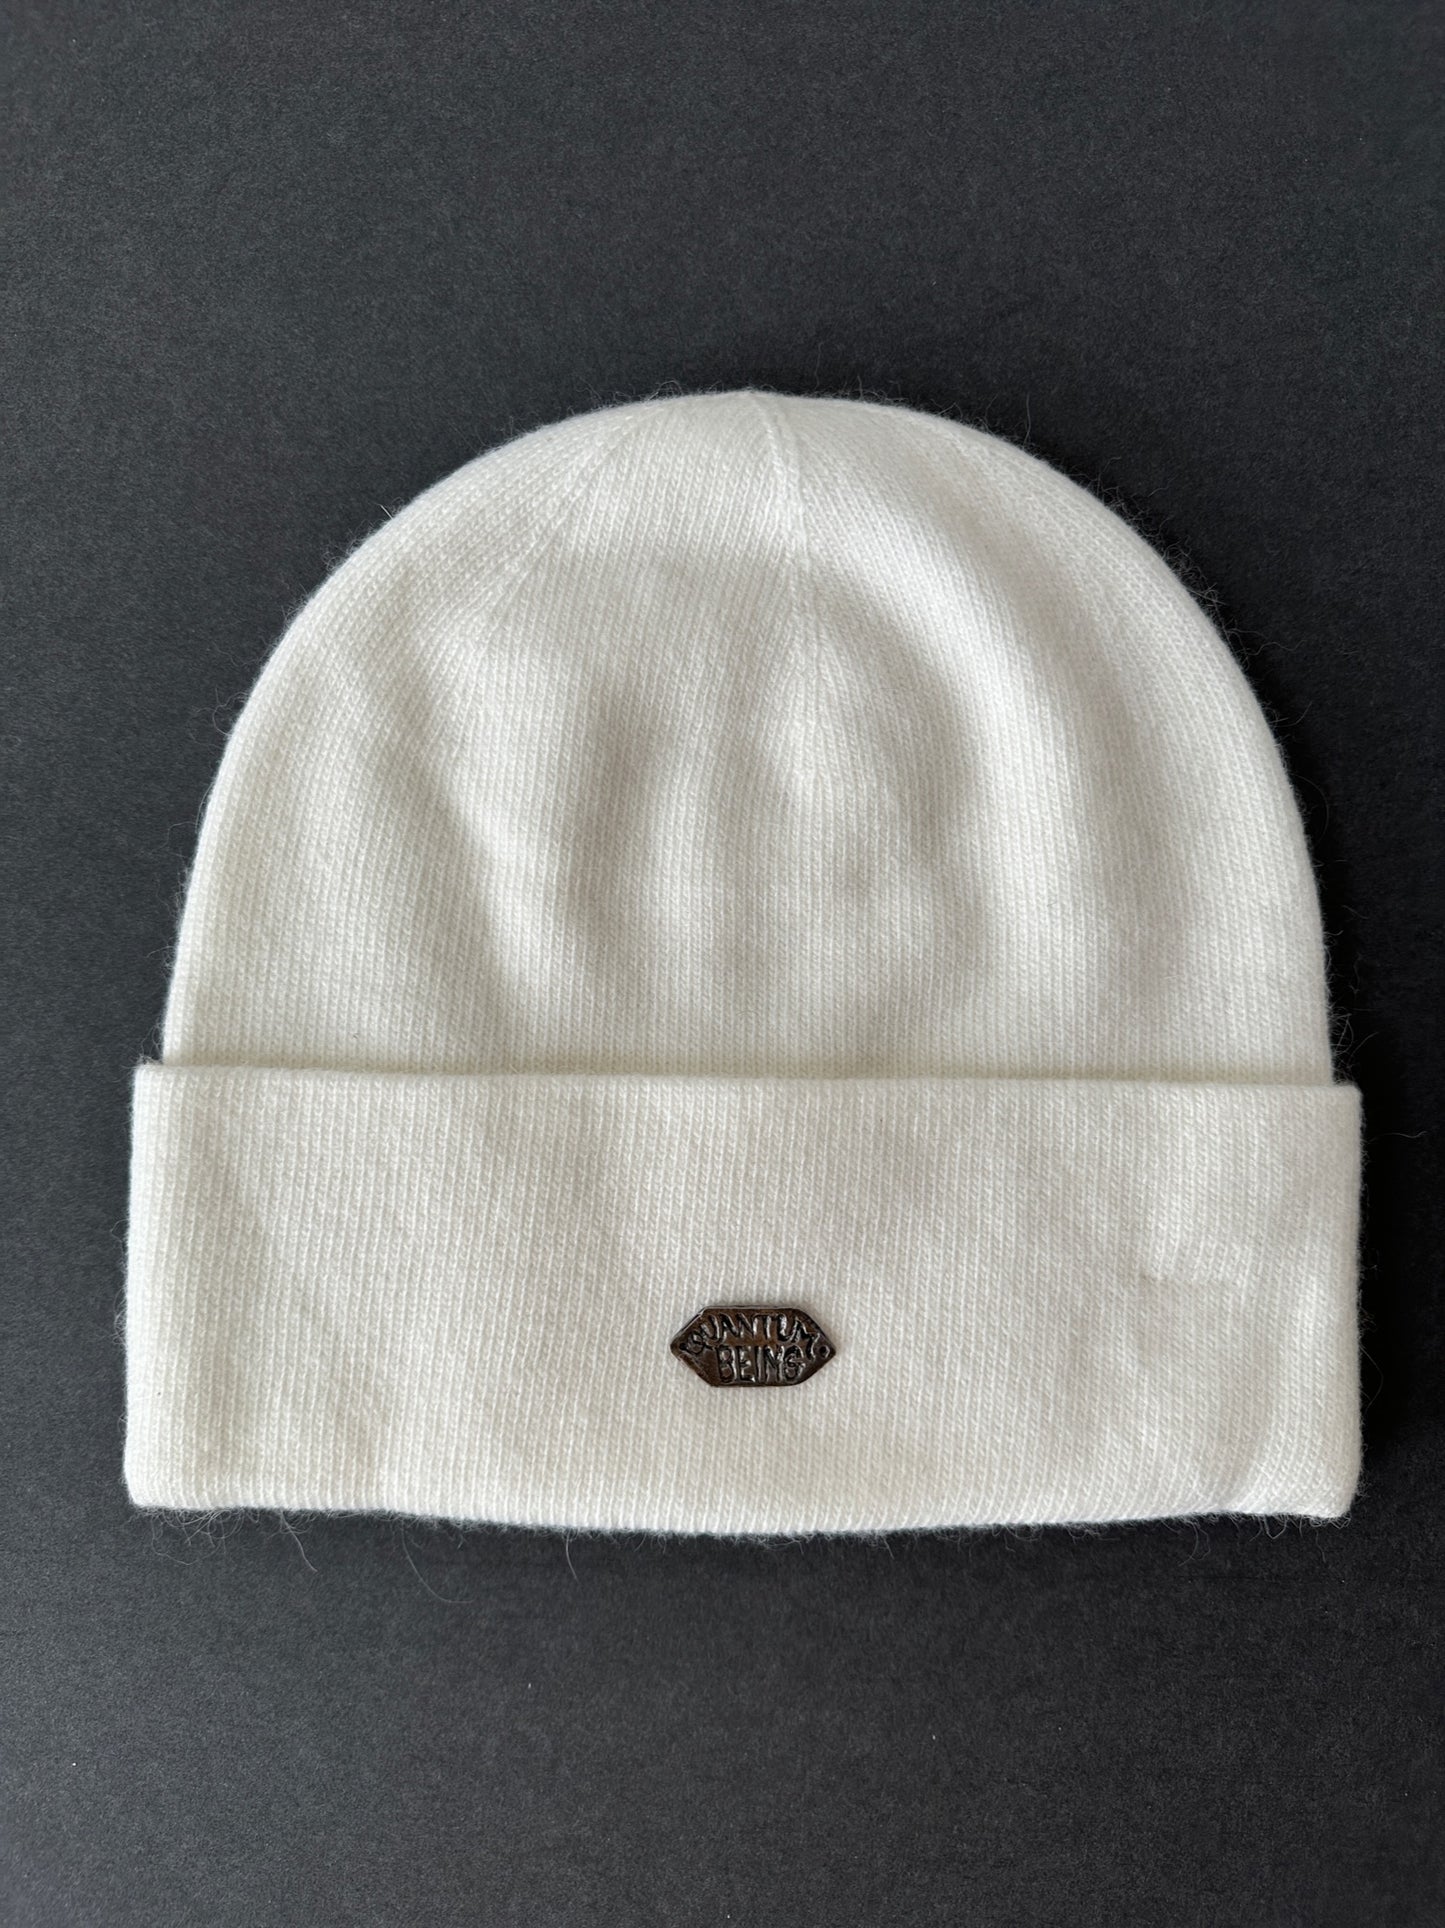 031. Sterling Silver "QUANTUM BEING" Cashmere Beanie in off white